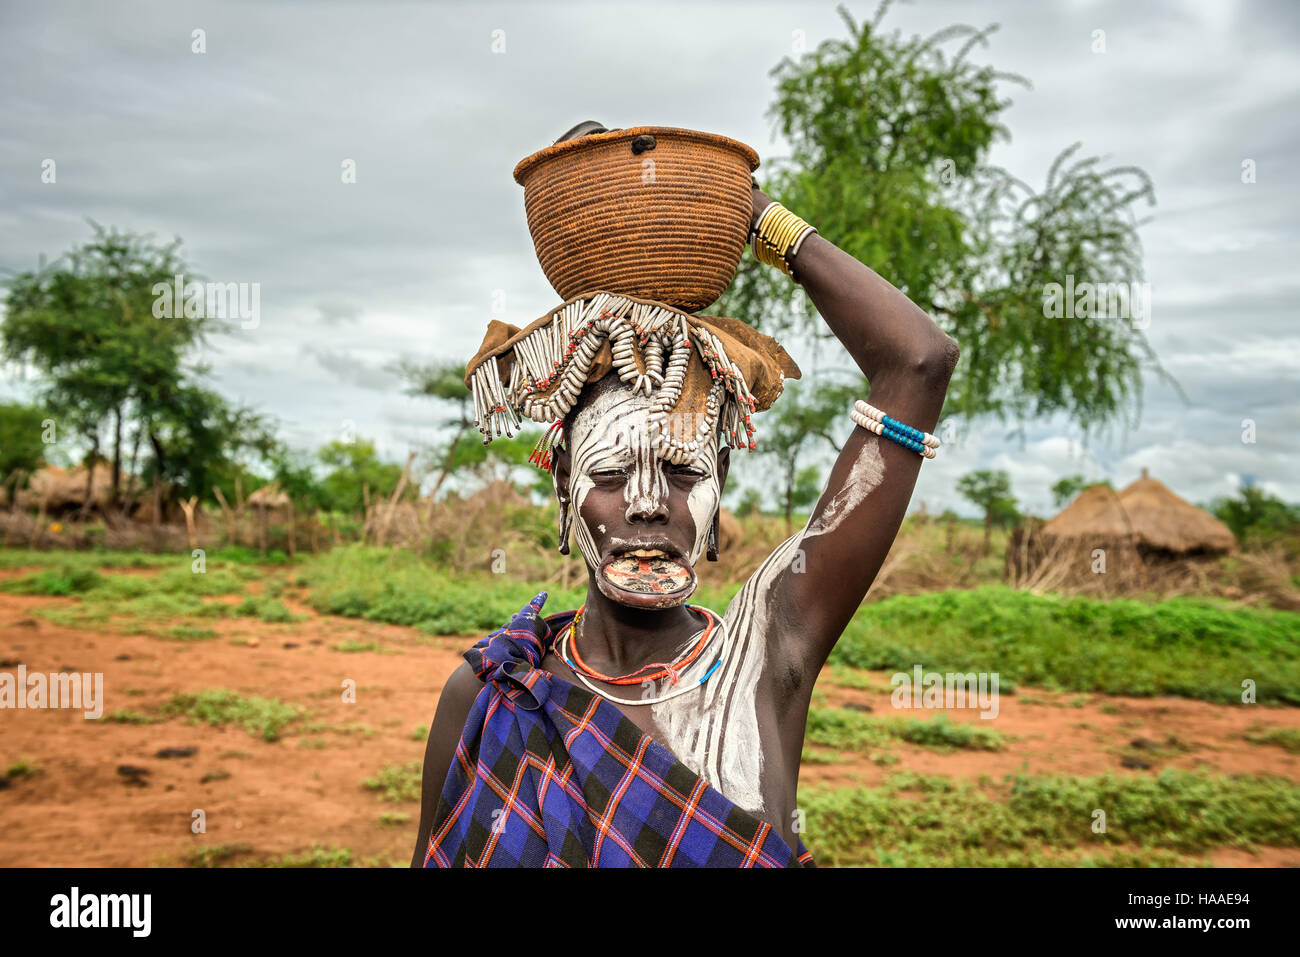 Woman from the african tribe Mursi with big lip plate and with a basket on her head Stock Photo